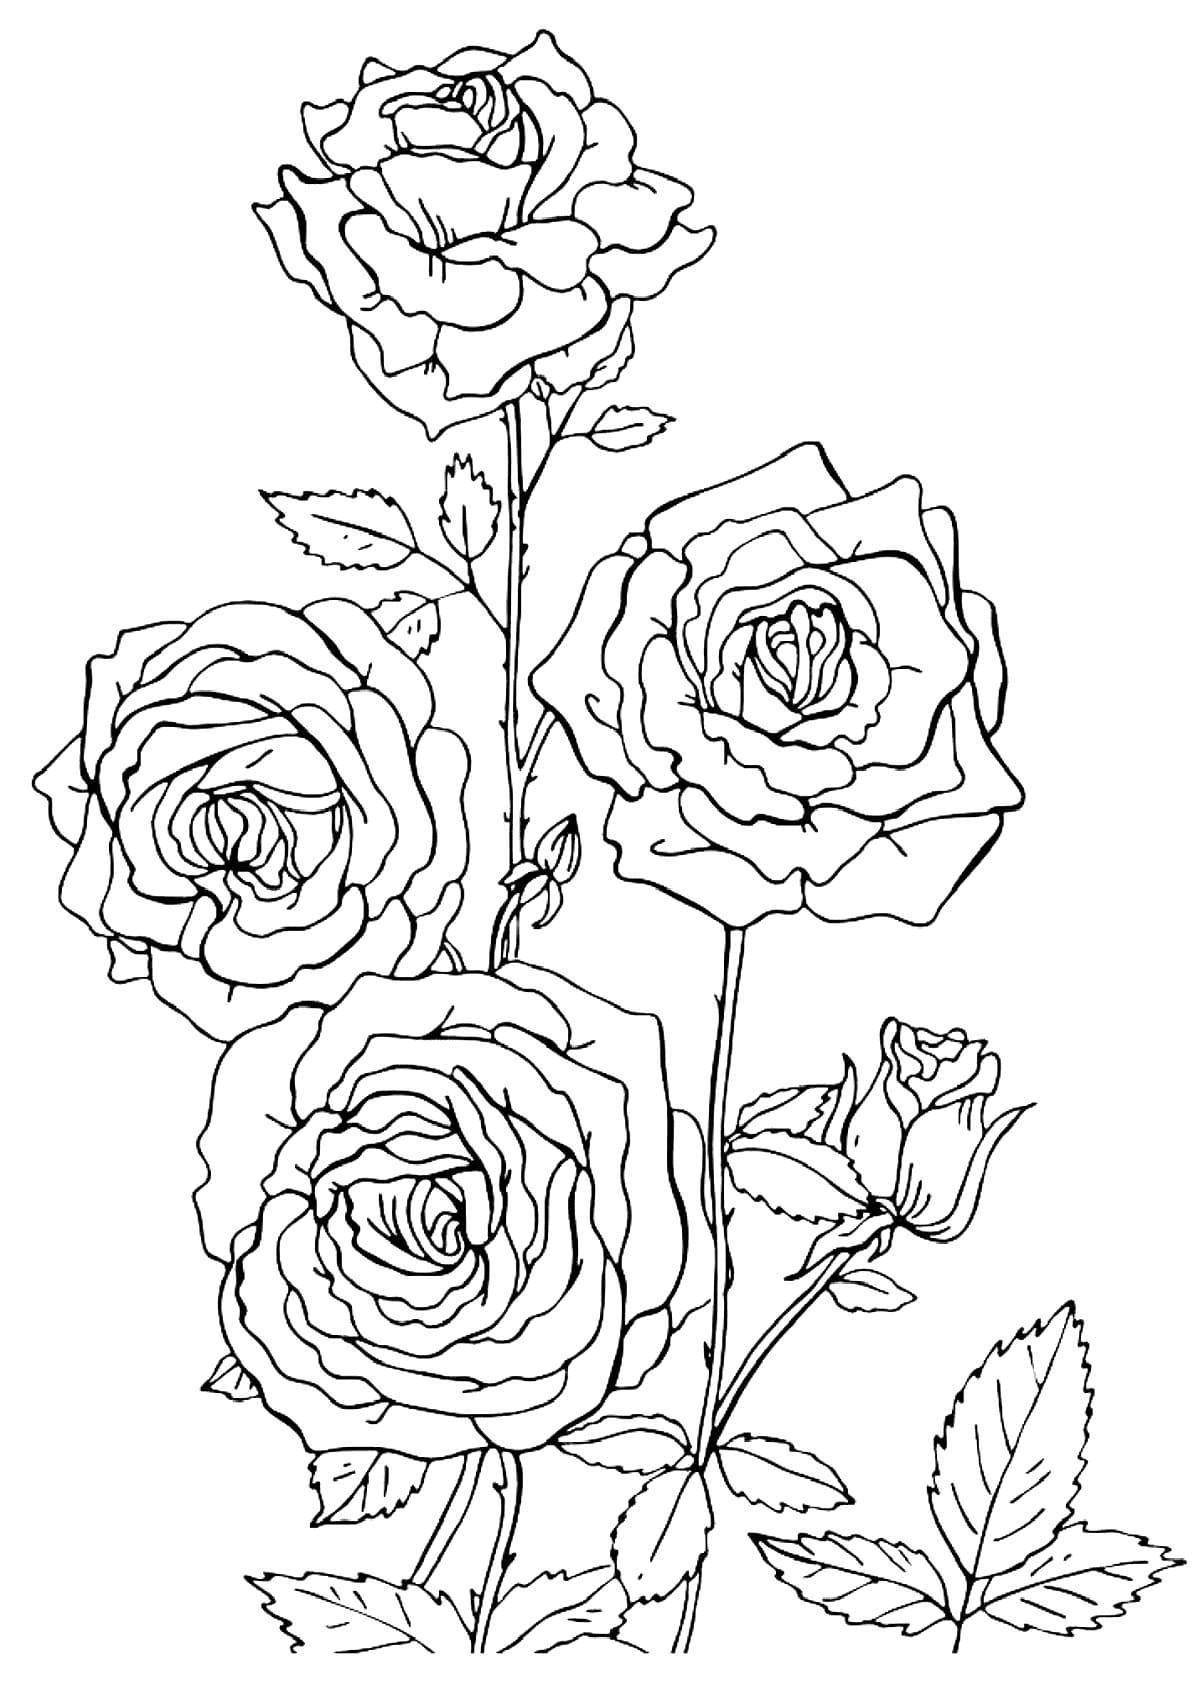 Majestic rose coloring by numbers